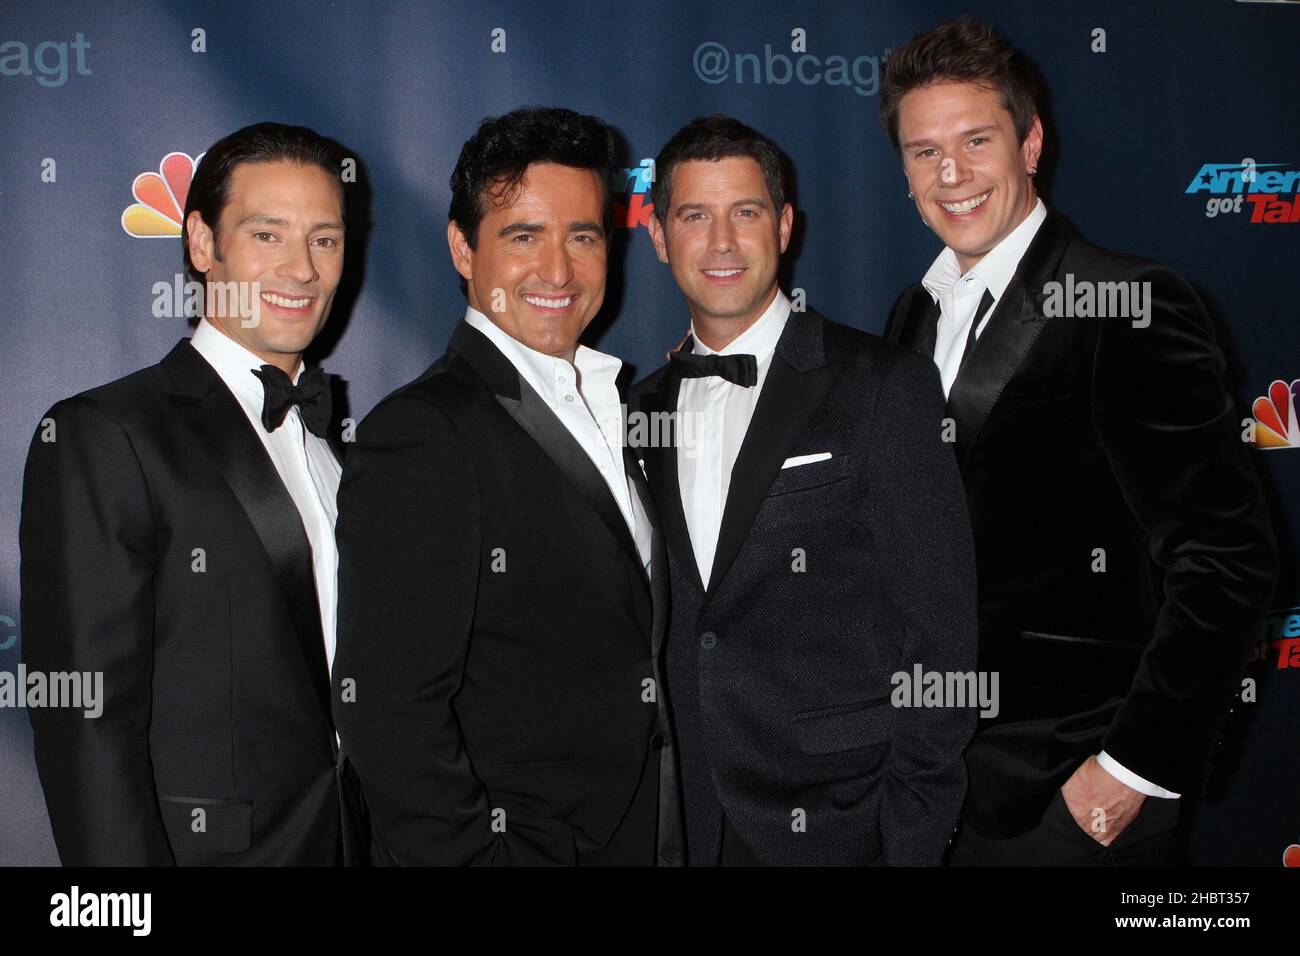 Urs Buhler, Carlos Marin, Sebastien Izambard and David Miller of Il Divo  attend the post-show finale red carpet for NBC's "America's Got Talent"  Season 8 at Radio City Music Hall in New